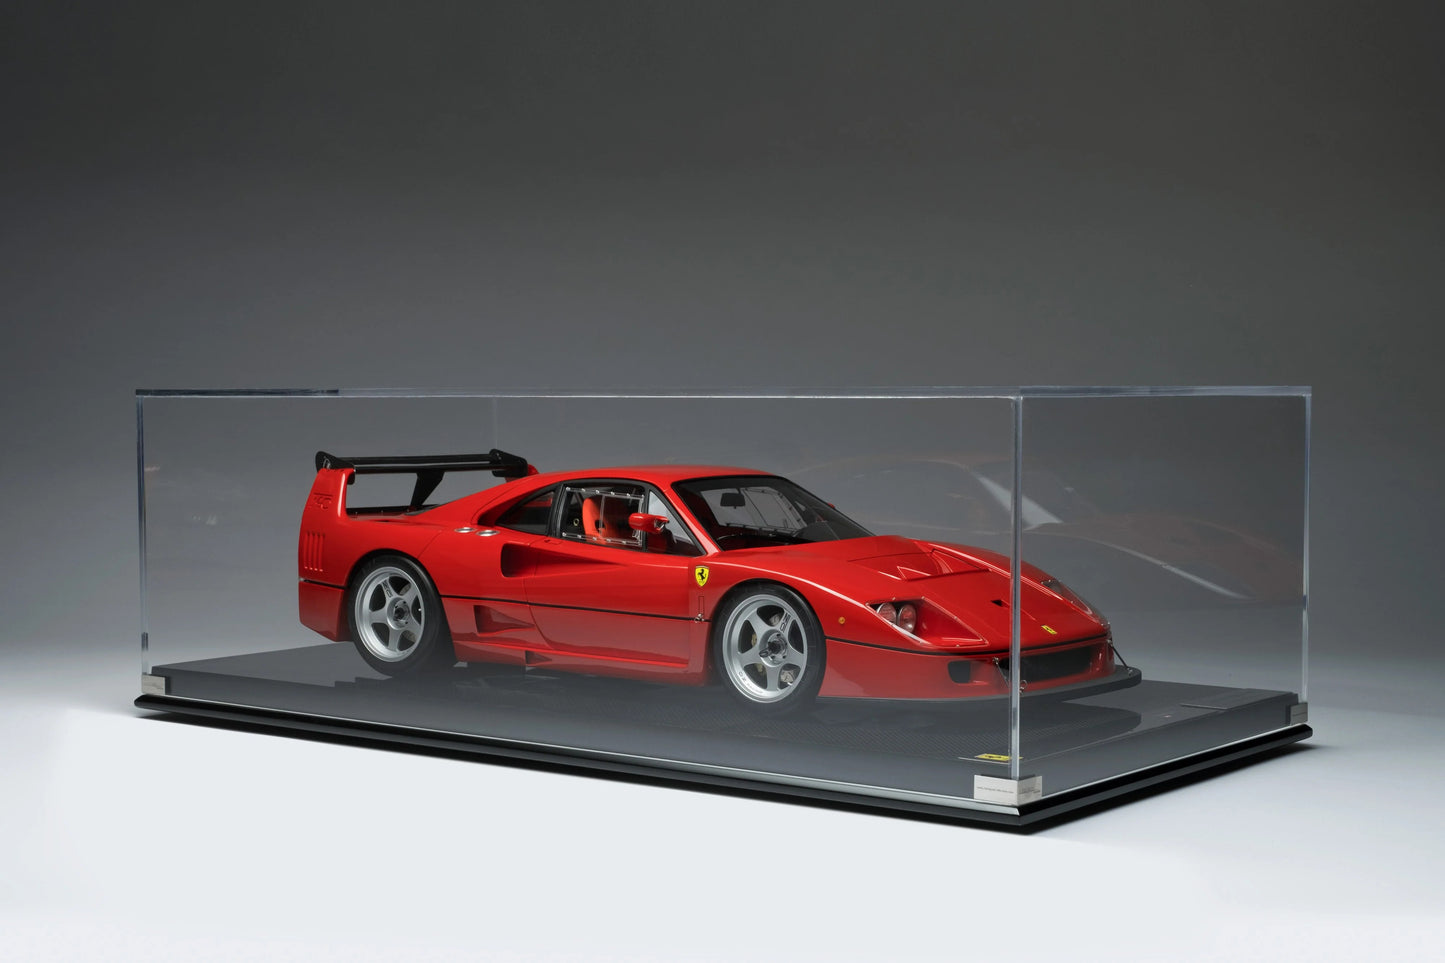 Amalgam Collection Ferrari F40 Competizione 1:8 Model Car | Exquisite Large-Scale Replica, Highly Detailed Collector's Item | Explore a Range of Luxury Collectibles at 2Jour Concierge, #1 luxury high-end gift & lifestyle shop